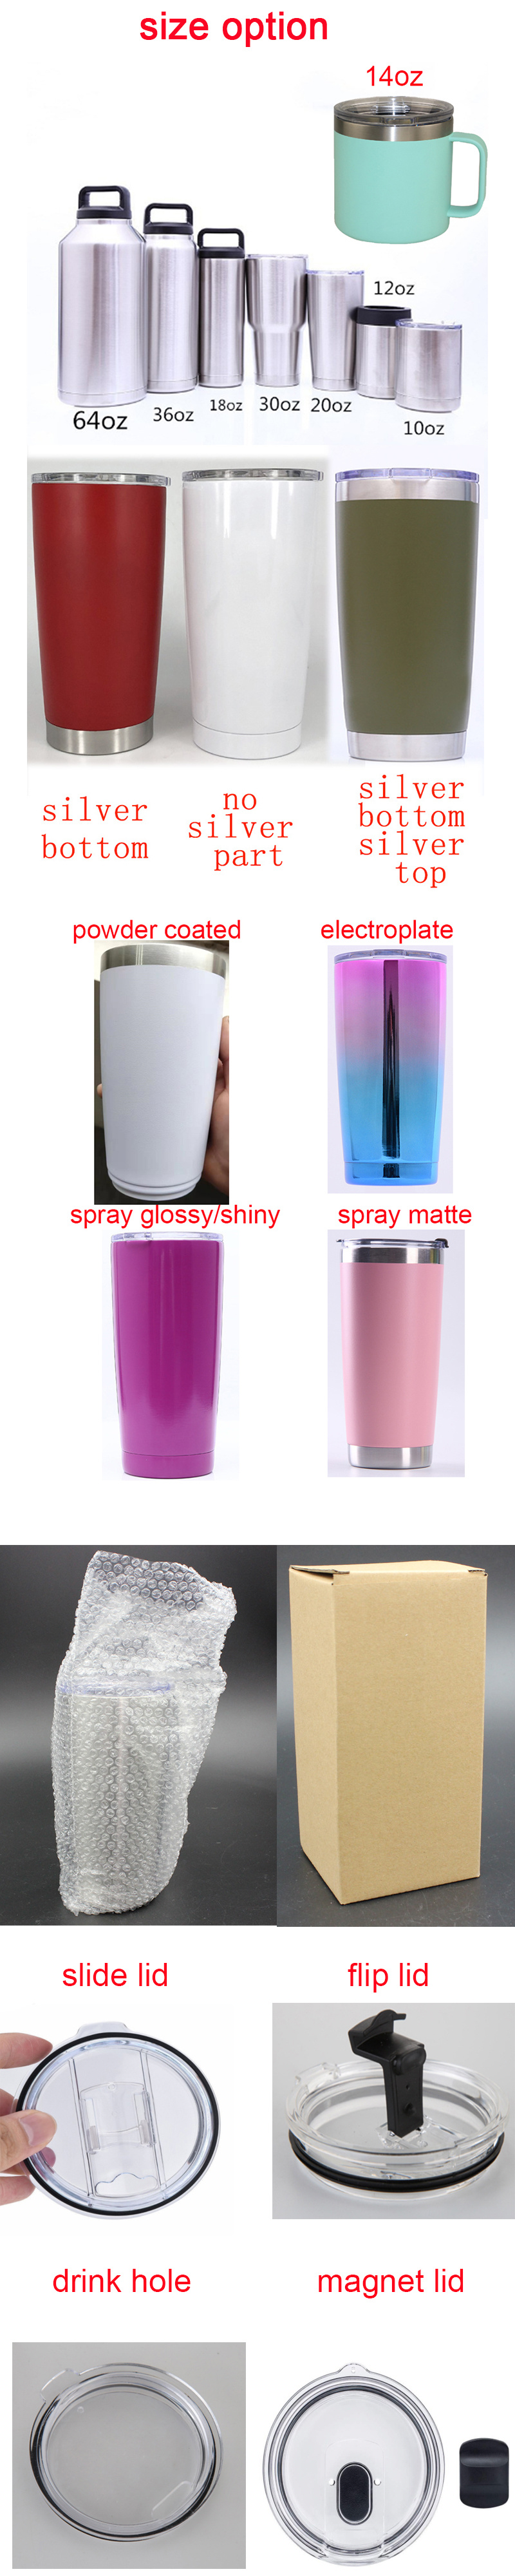 18/8 Stainless Steel Double Wall Tumbler 20oz Insulated Coffee Travel Mug Tumbler Chinayetiprice